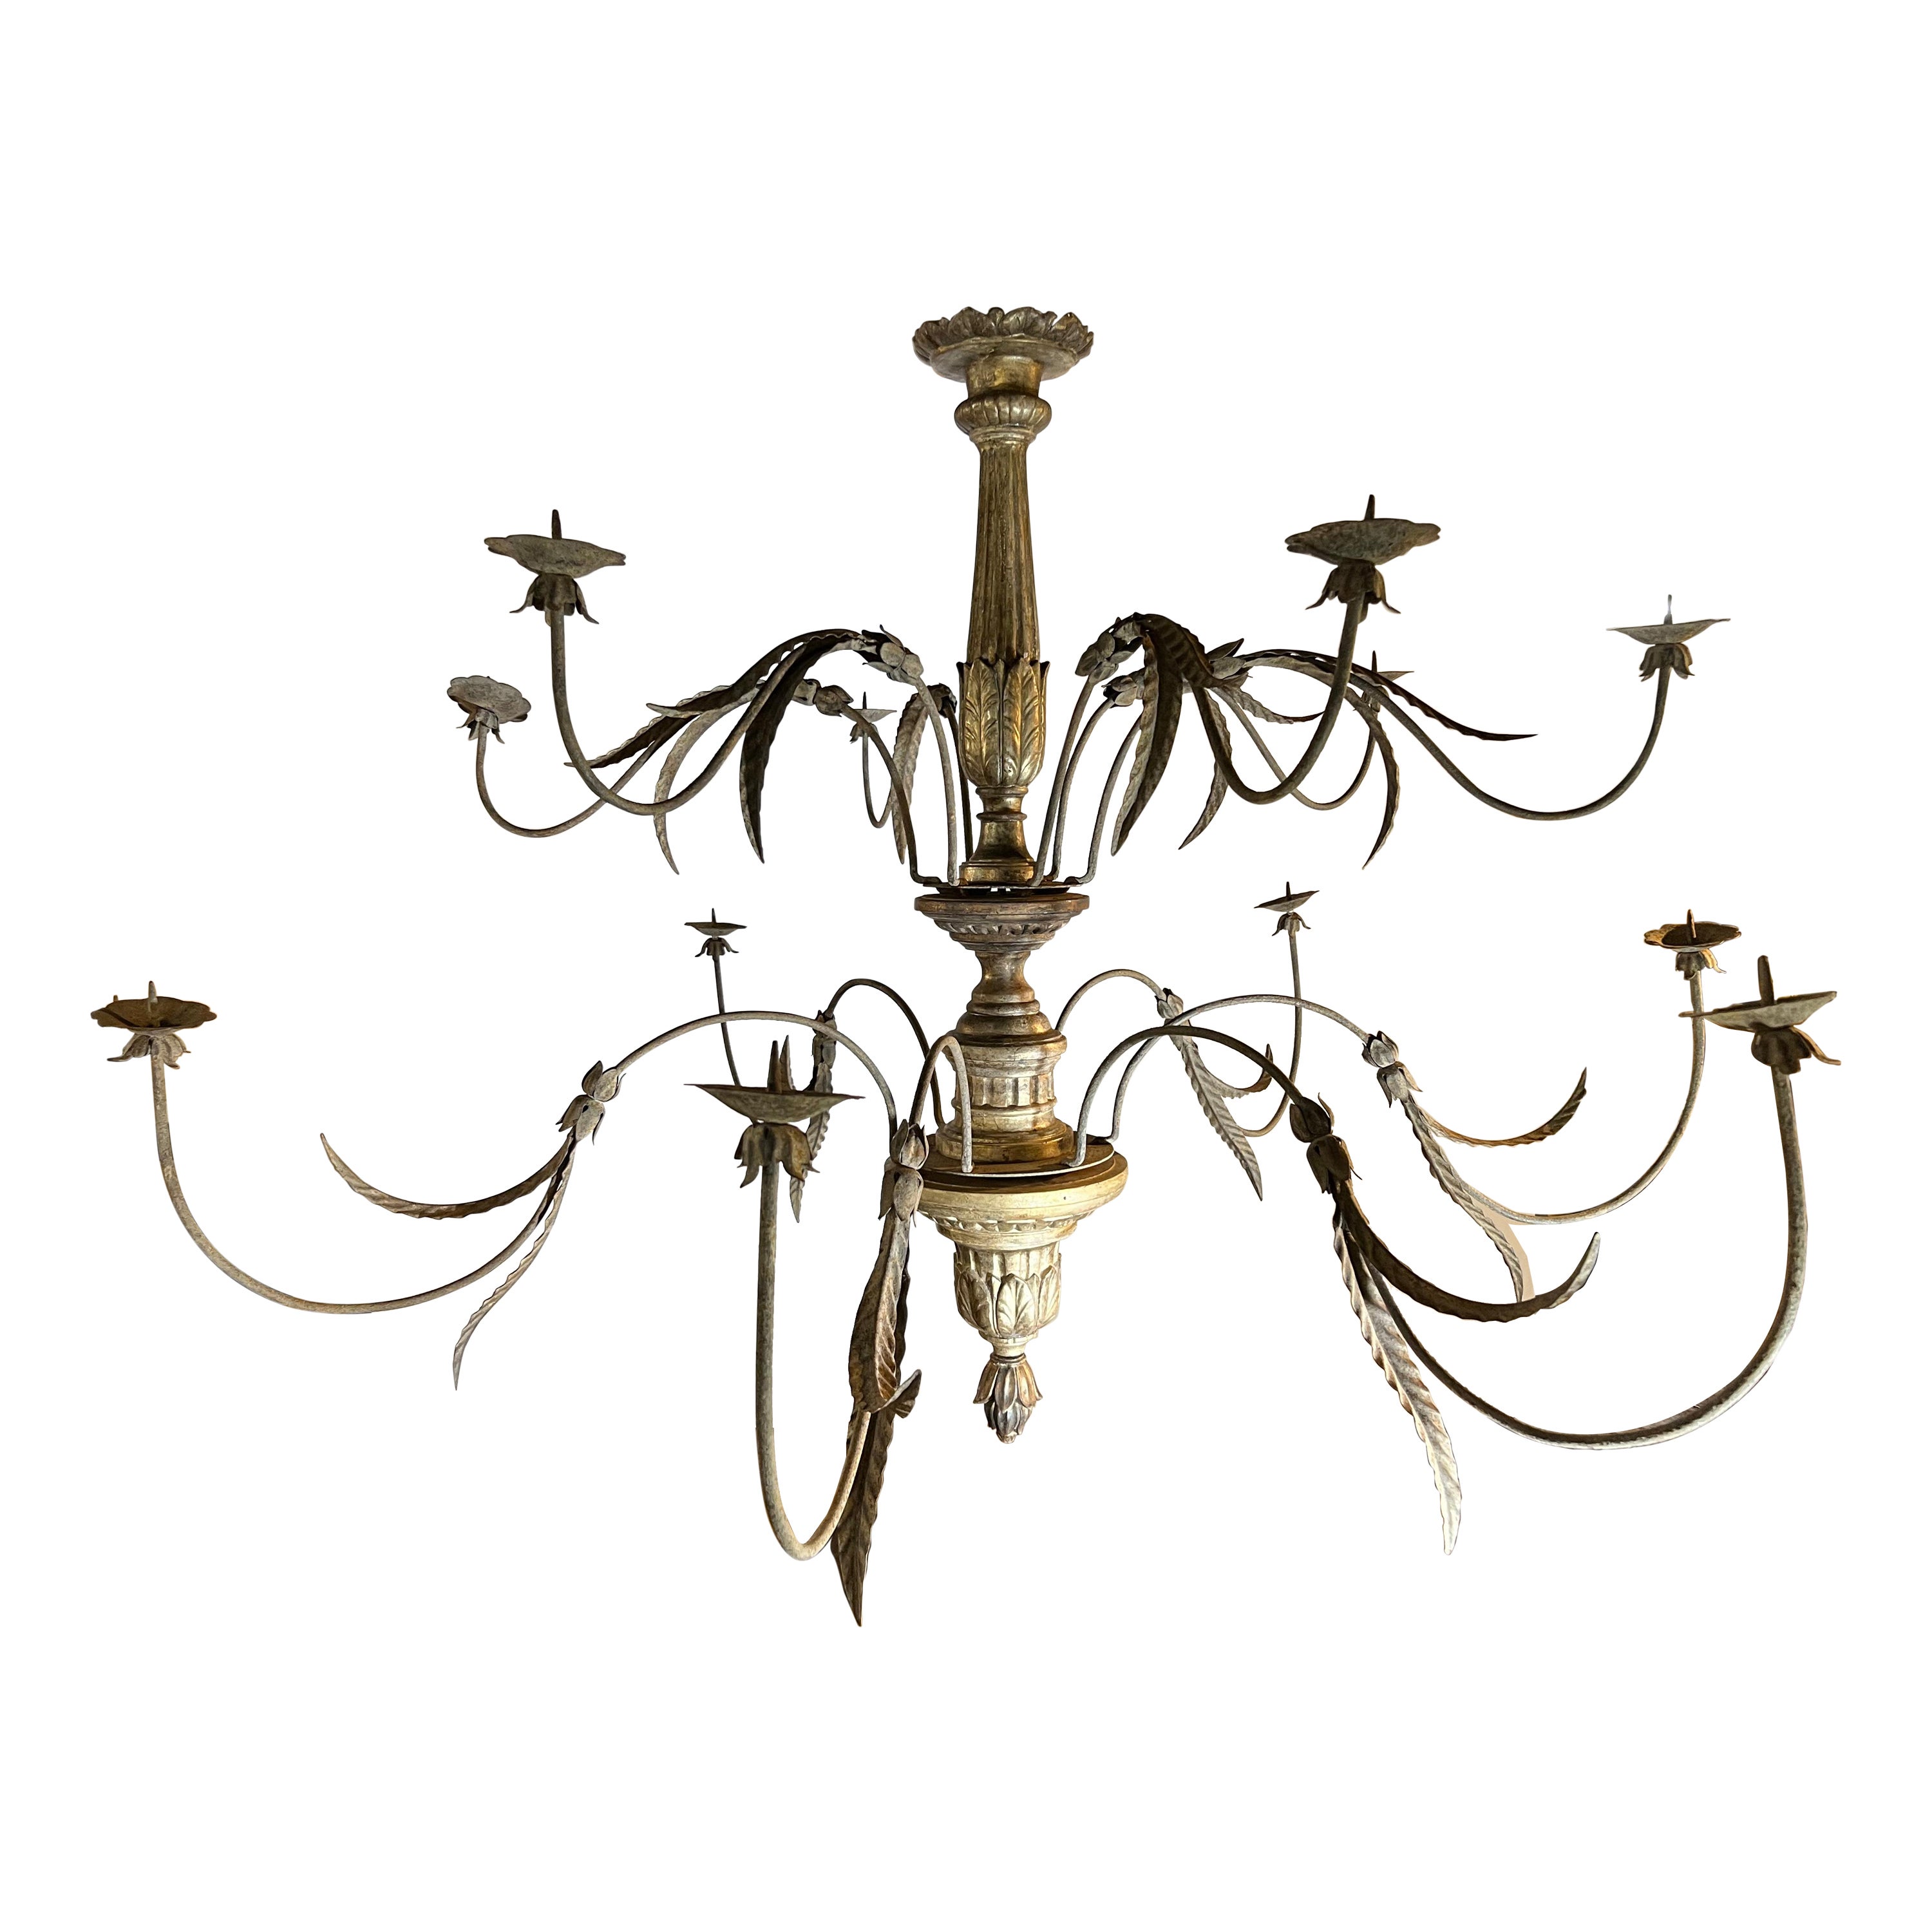 Exceptional Mid-18th Century 2-Tiered Italian Chandelier